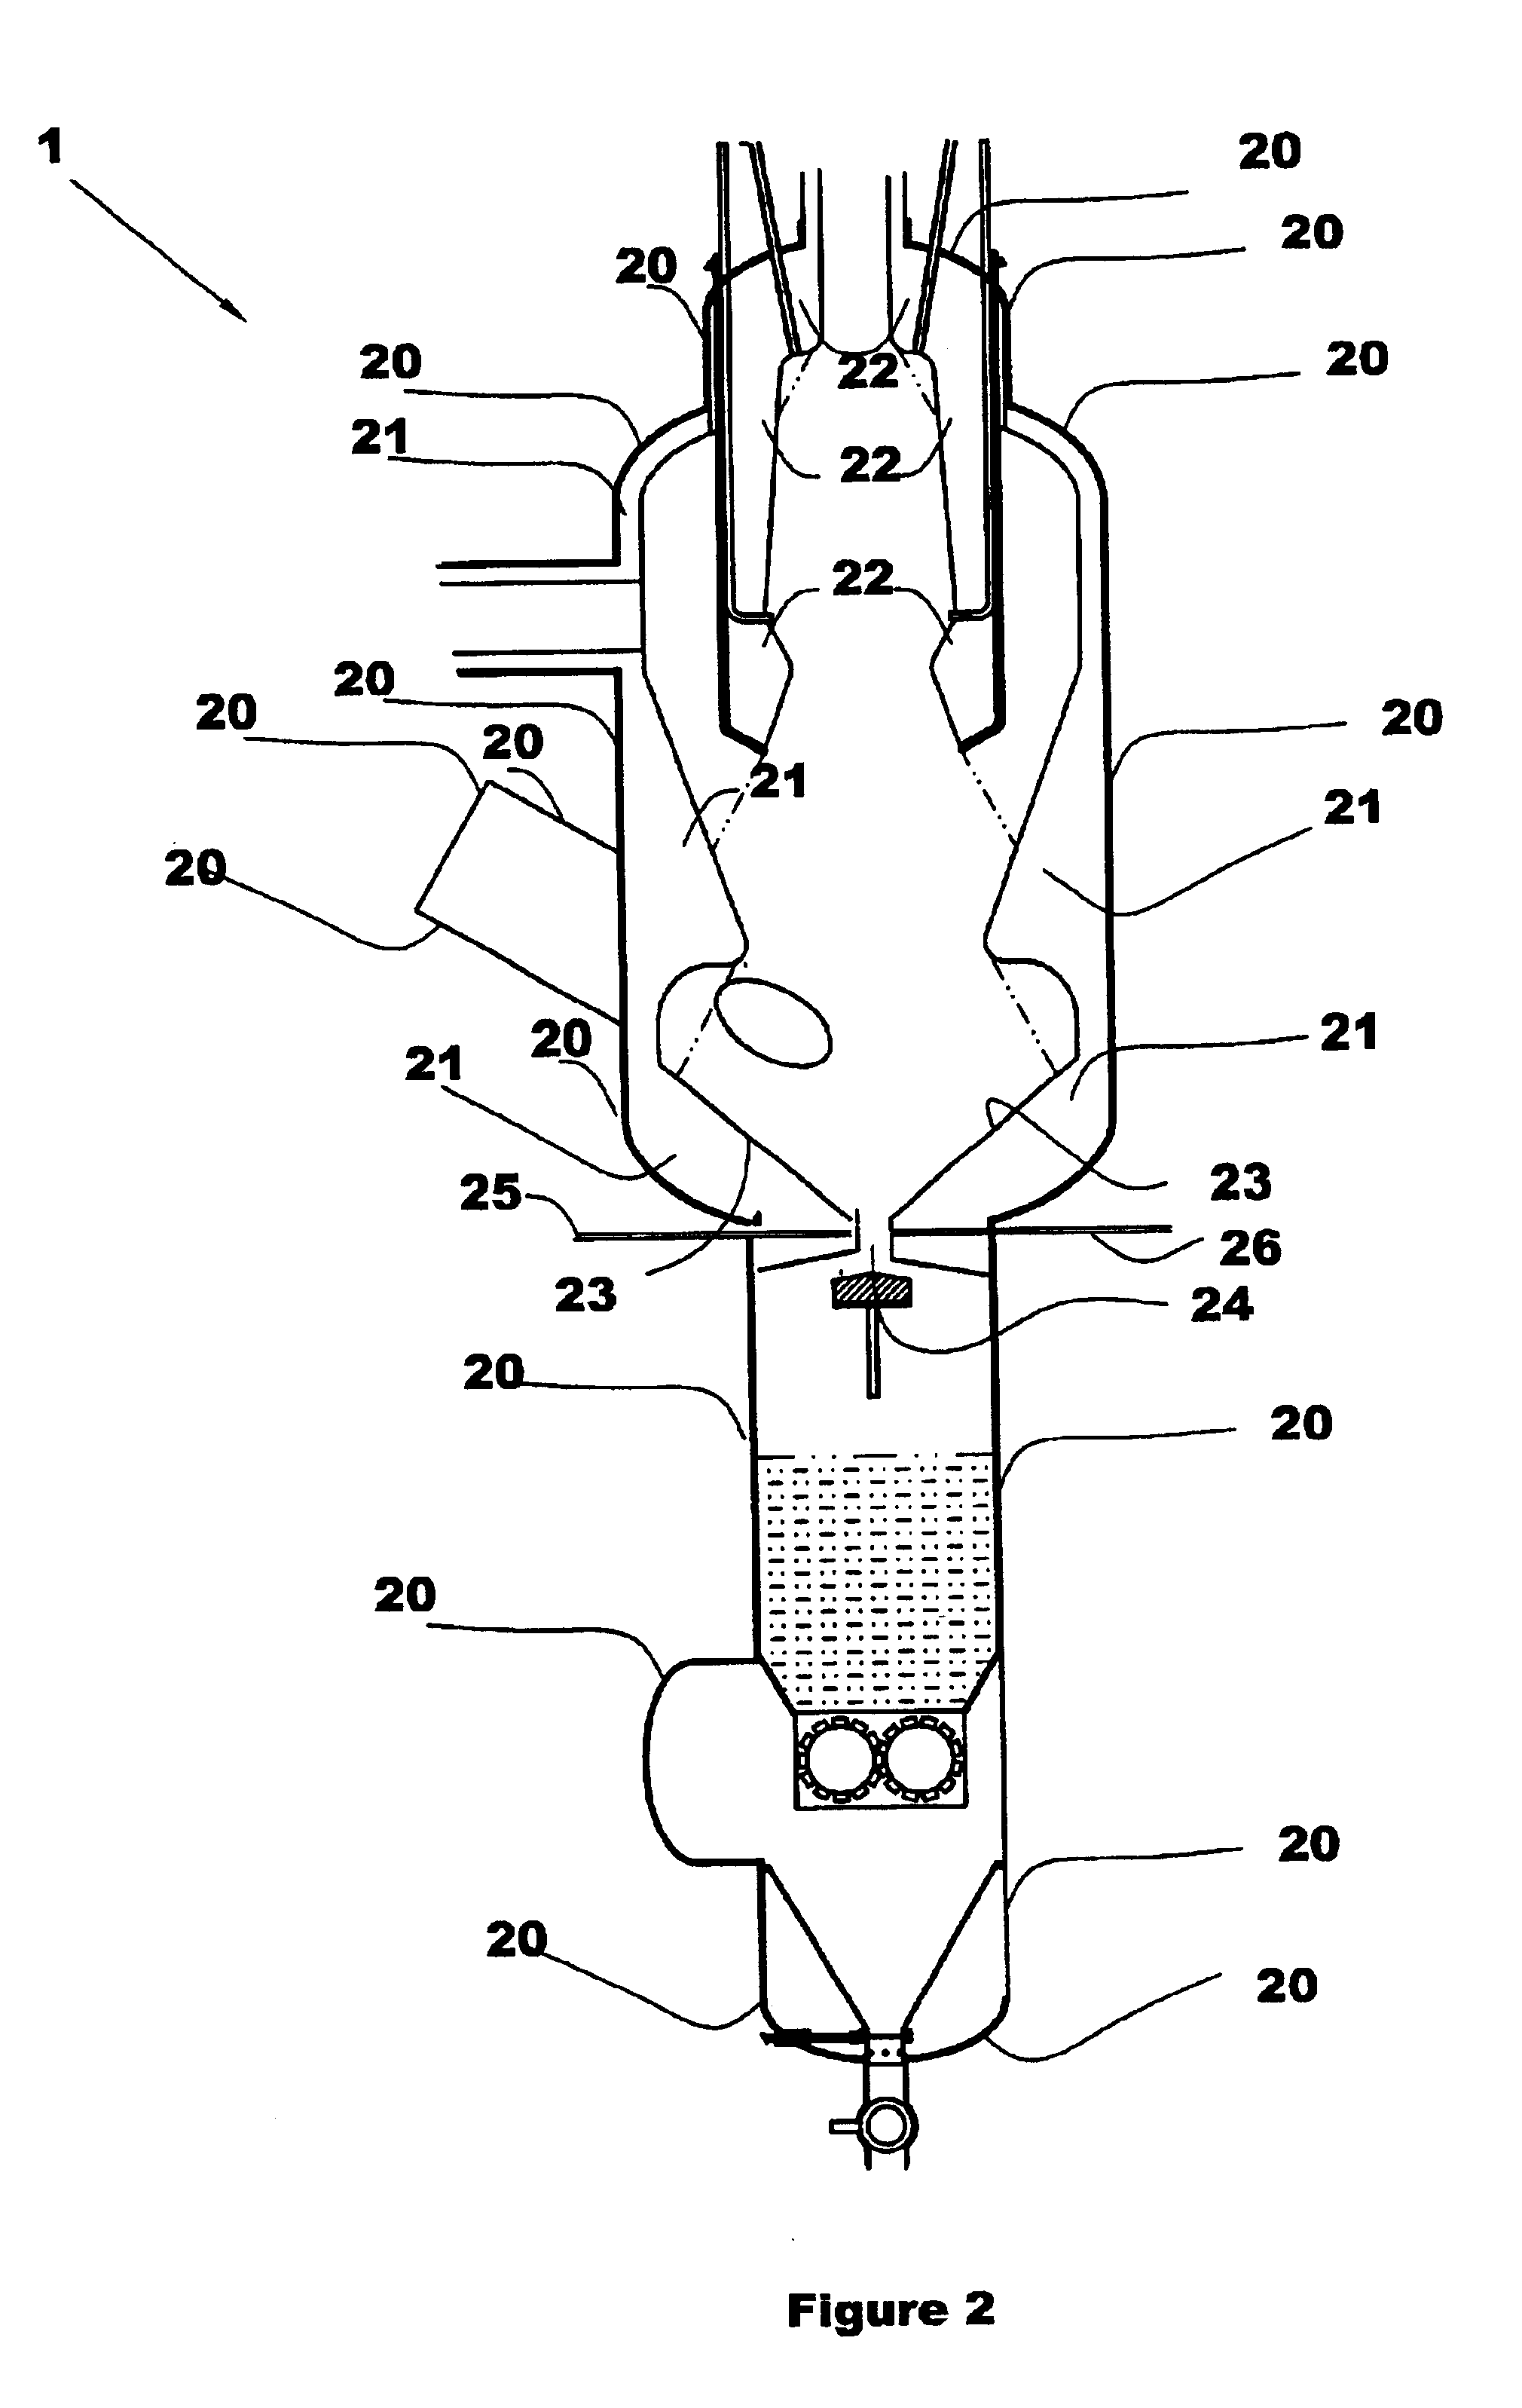 Multi-faceted gasifier and related methods